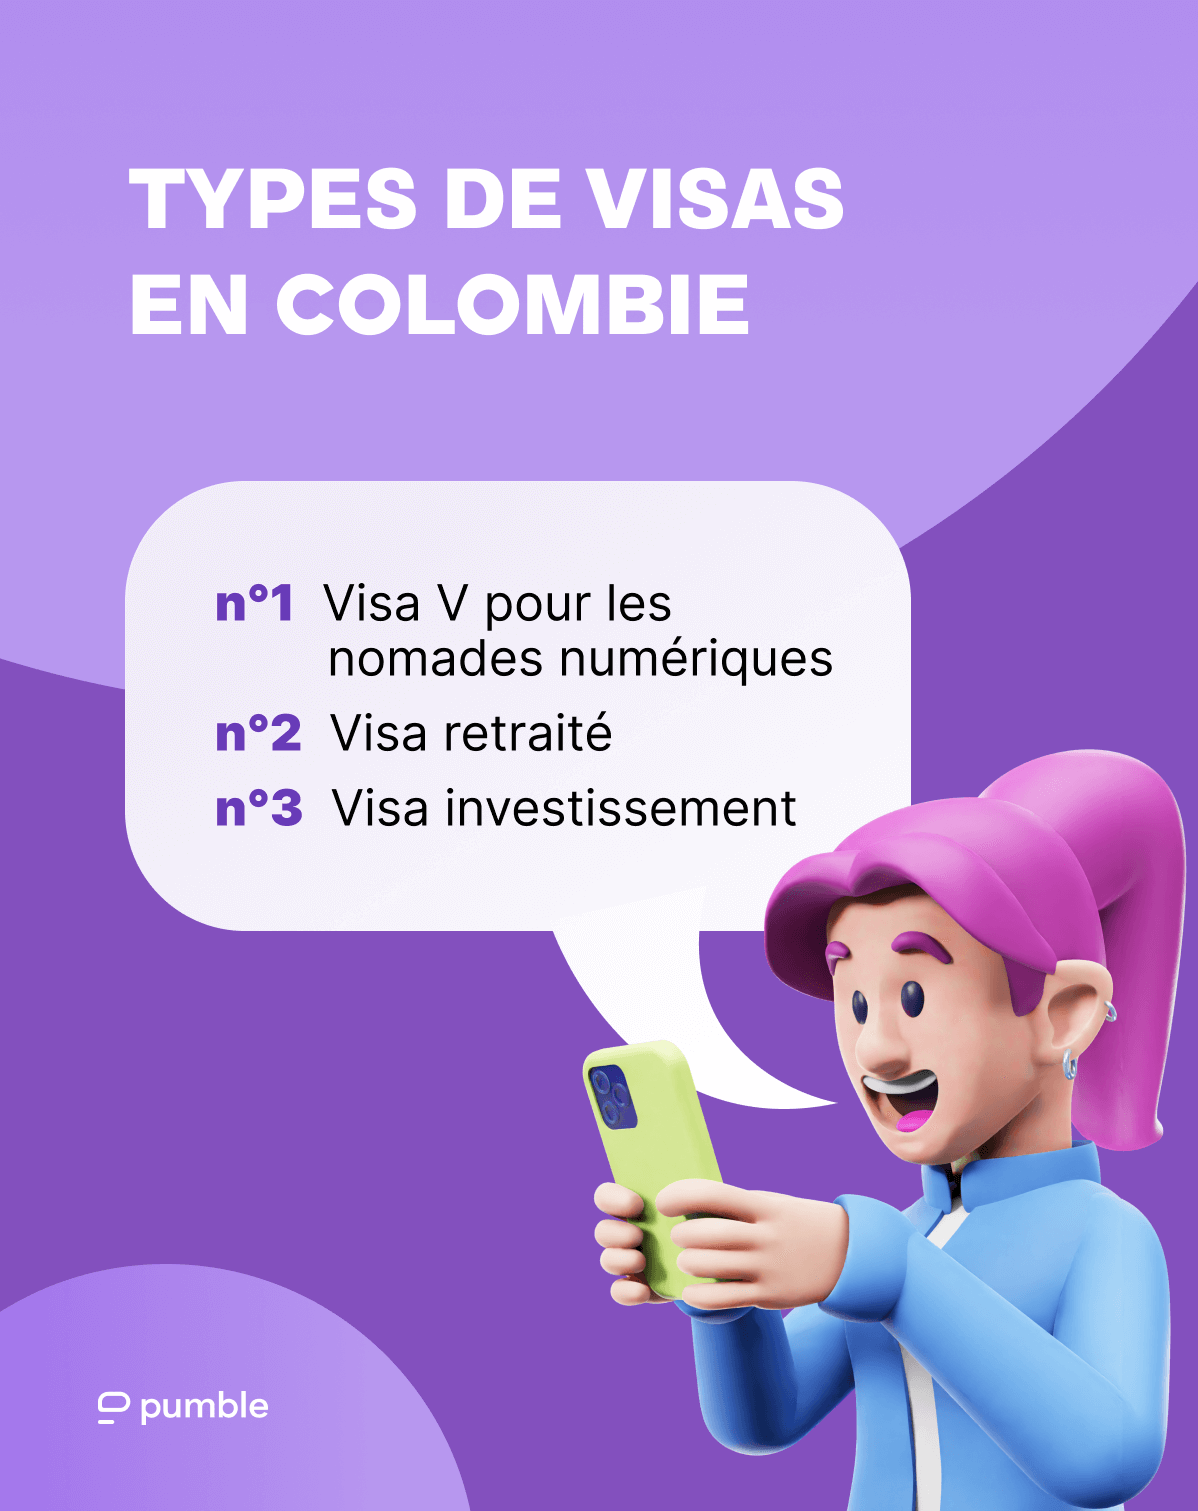  types of visas colombia